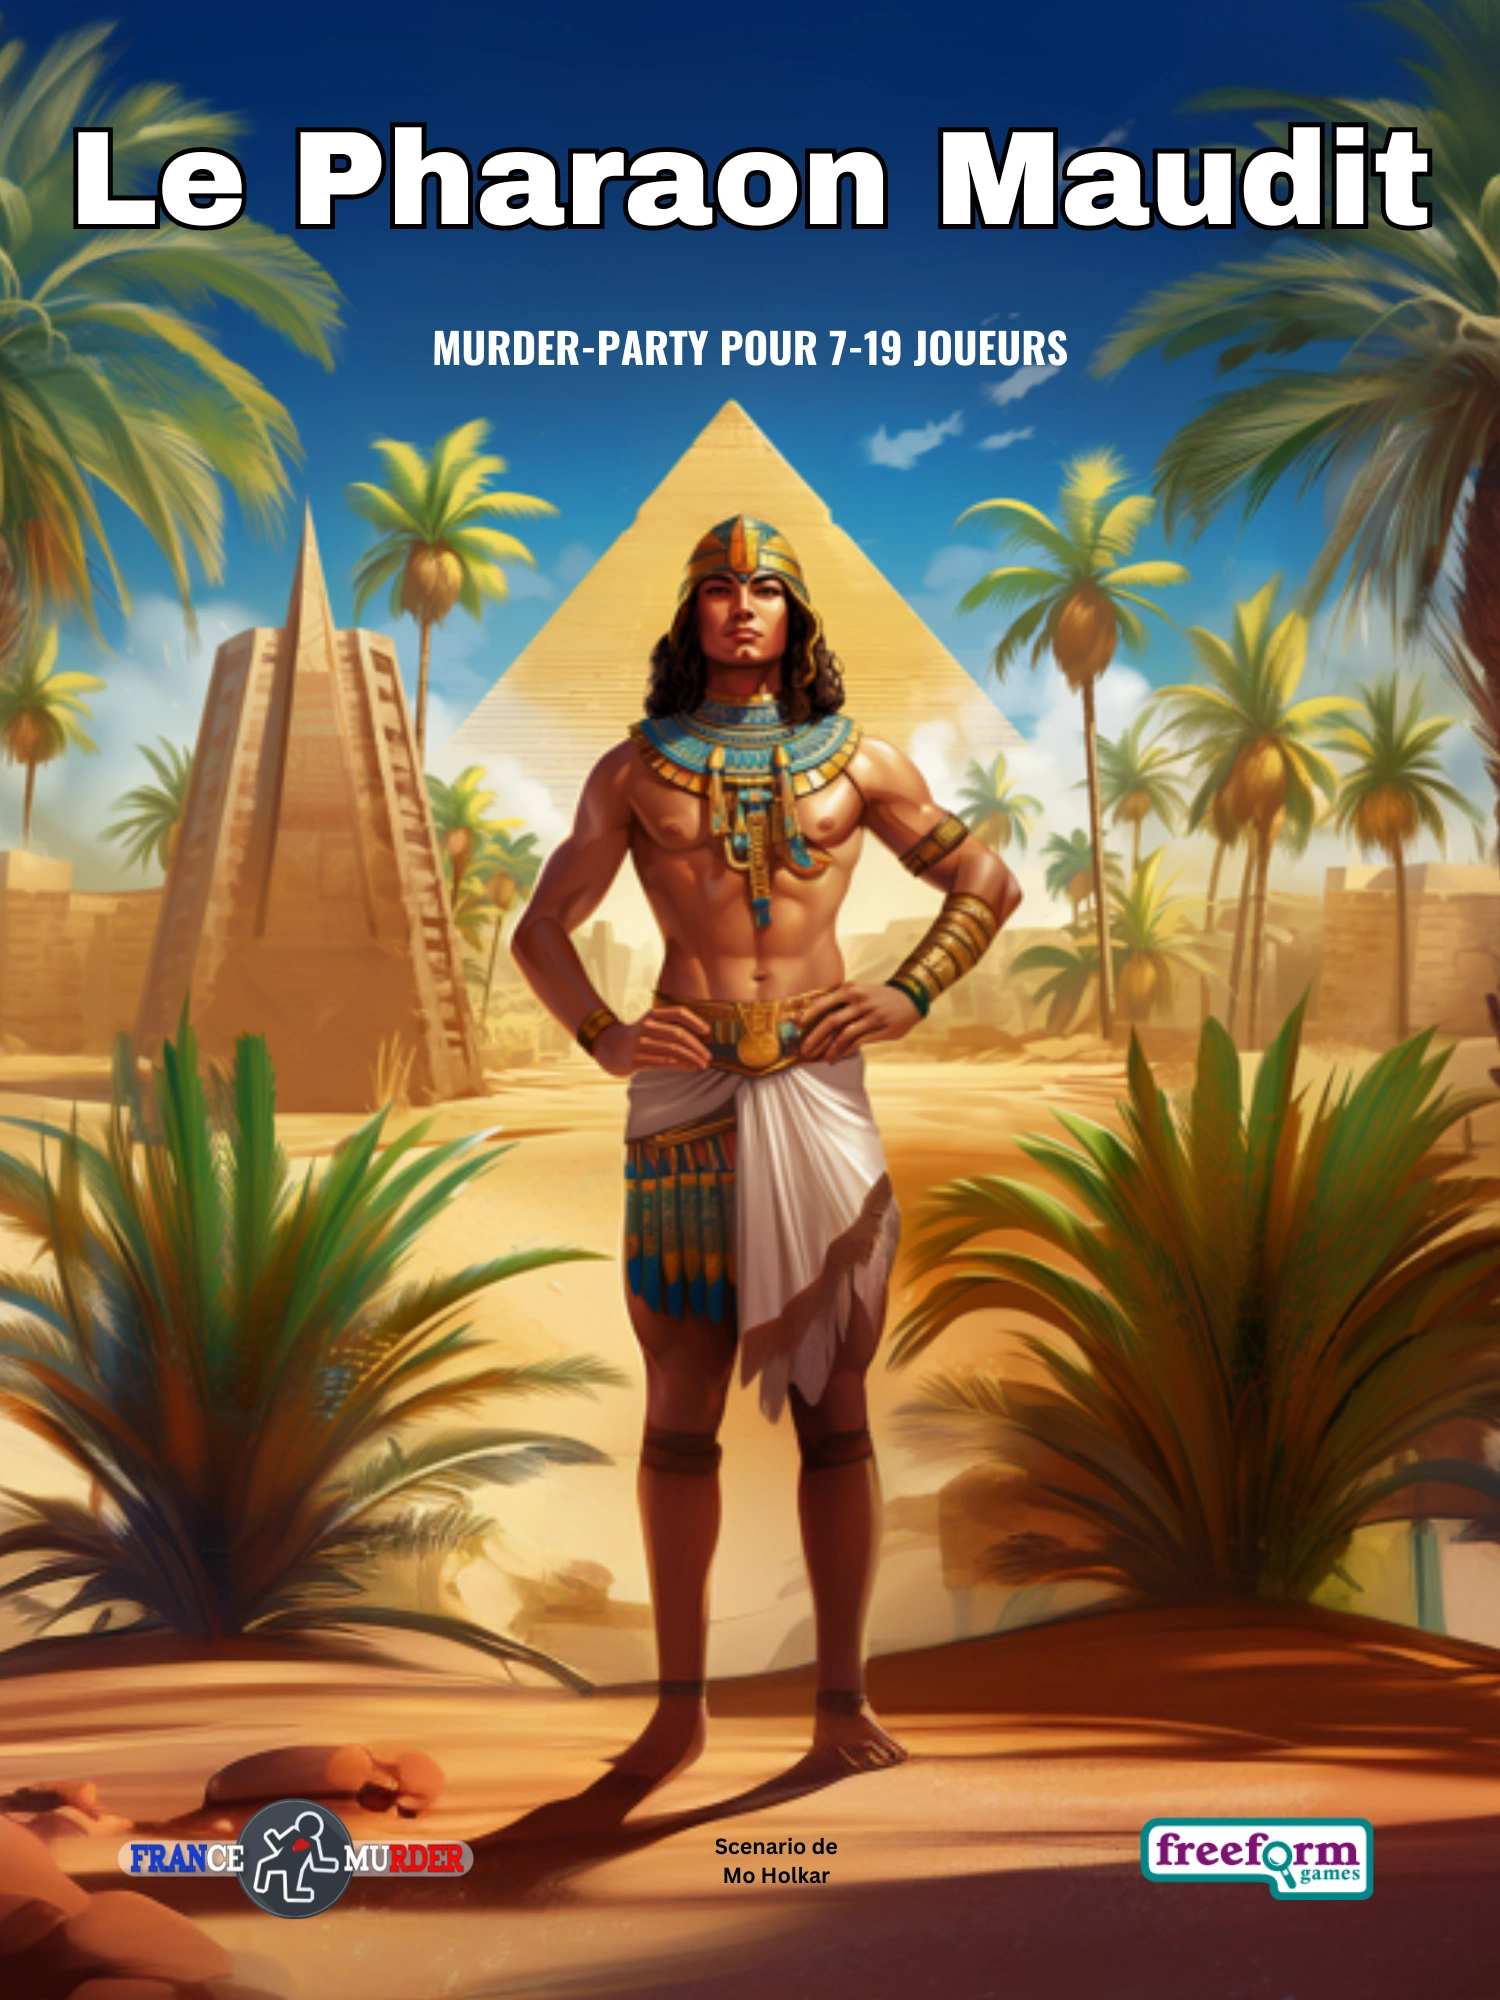 Cover to Le Pharaon Maudit, a French murder mystery game